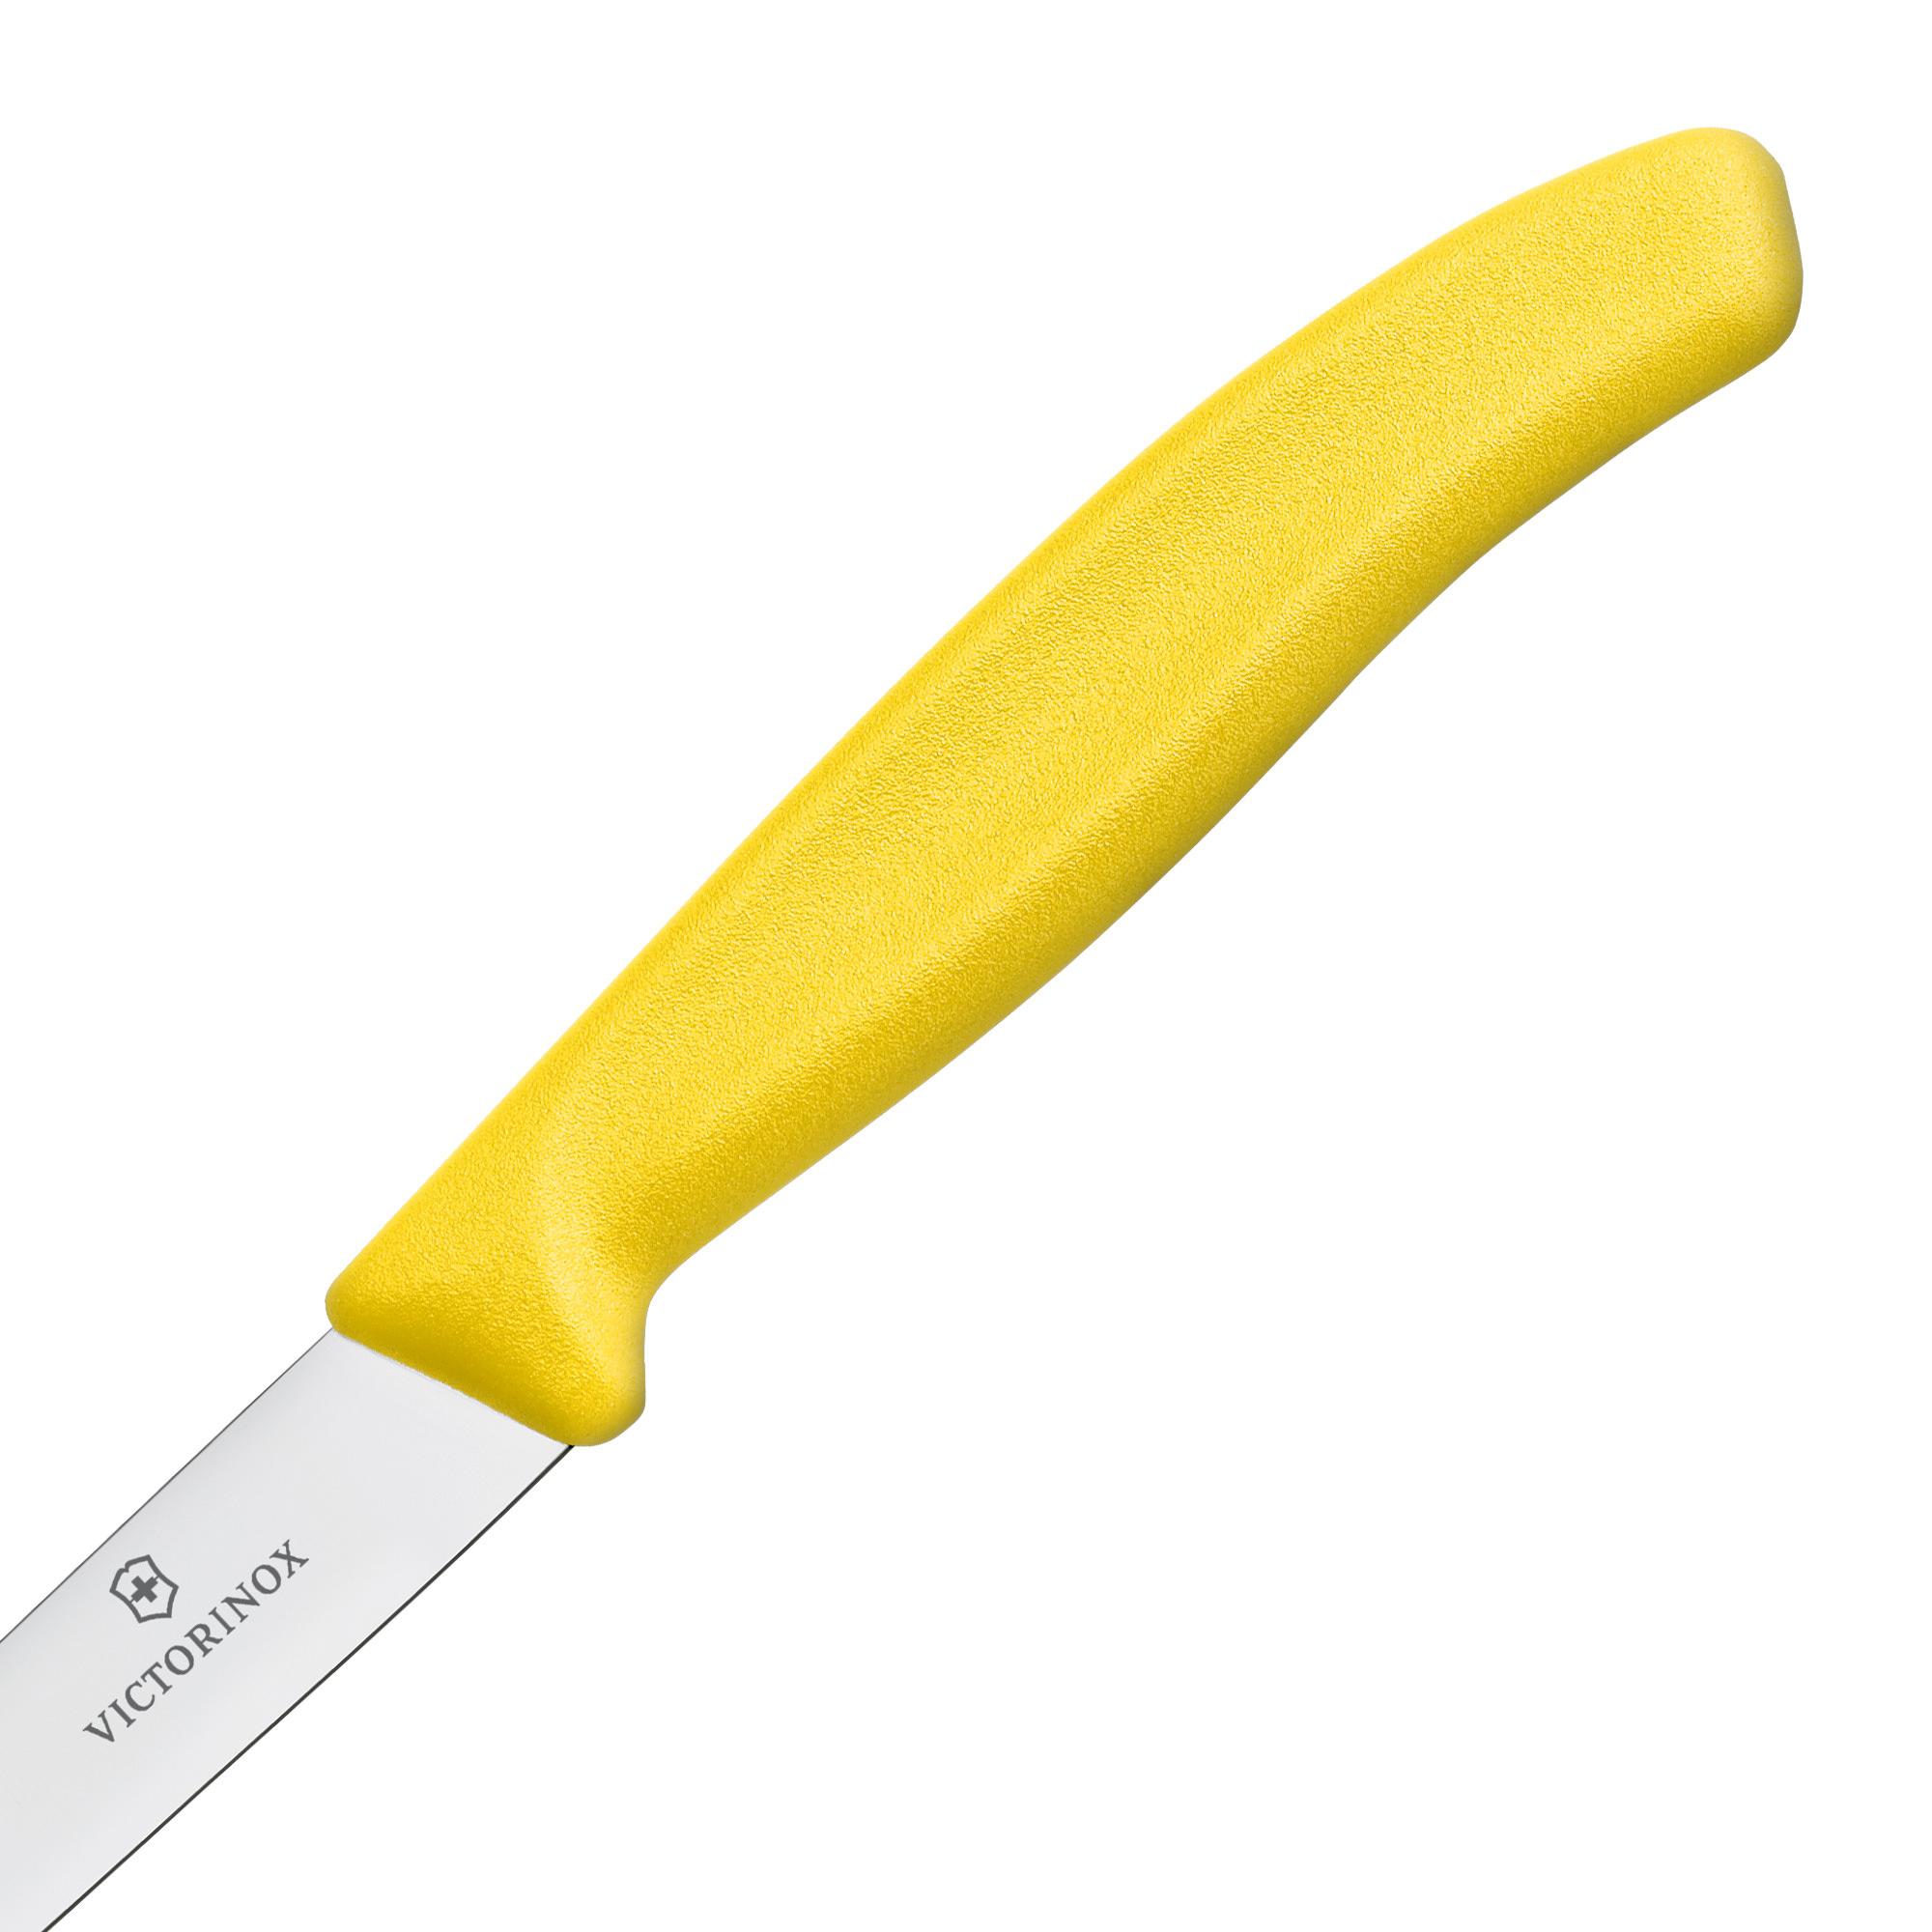 Victorinox Swiss Classic Pointed Tip Vegetable Knife 10cm Yellow Image 3